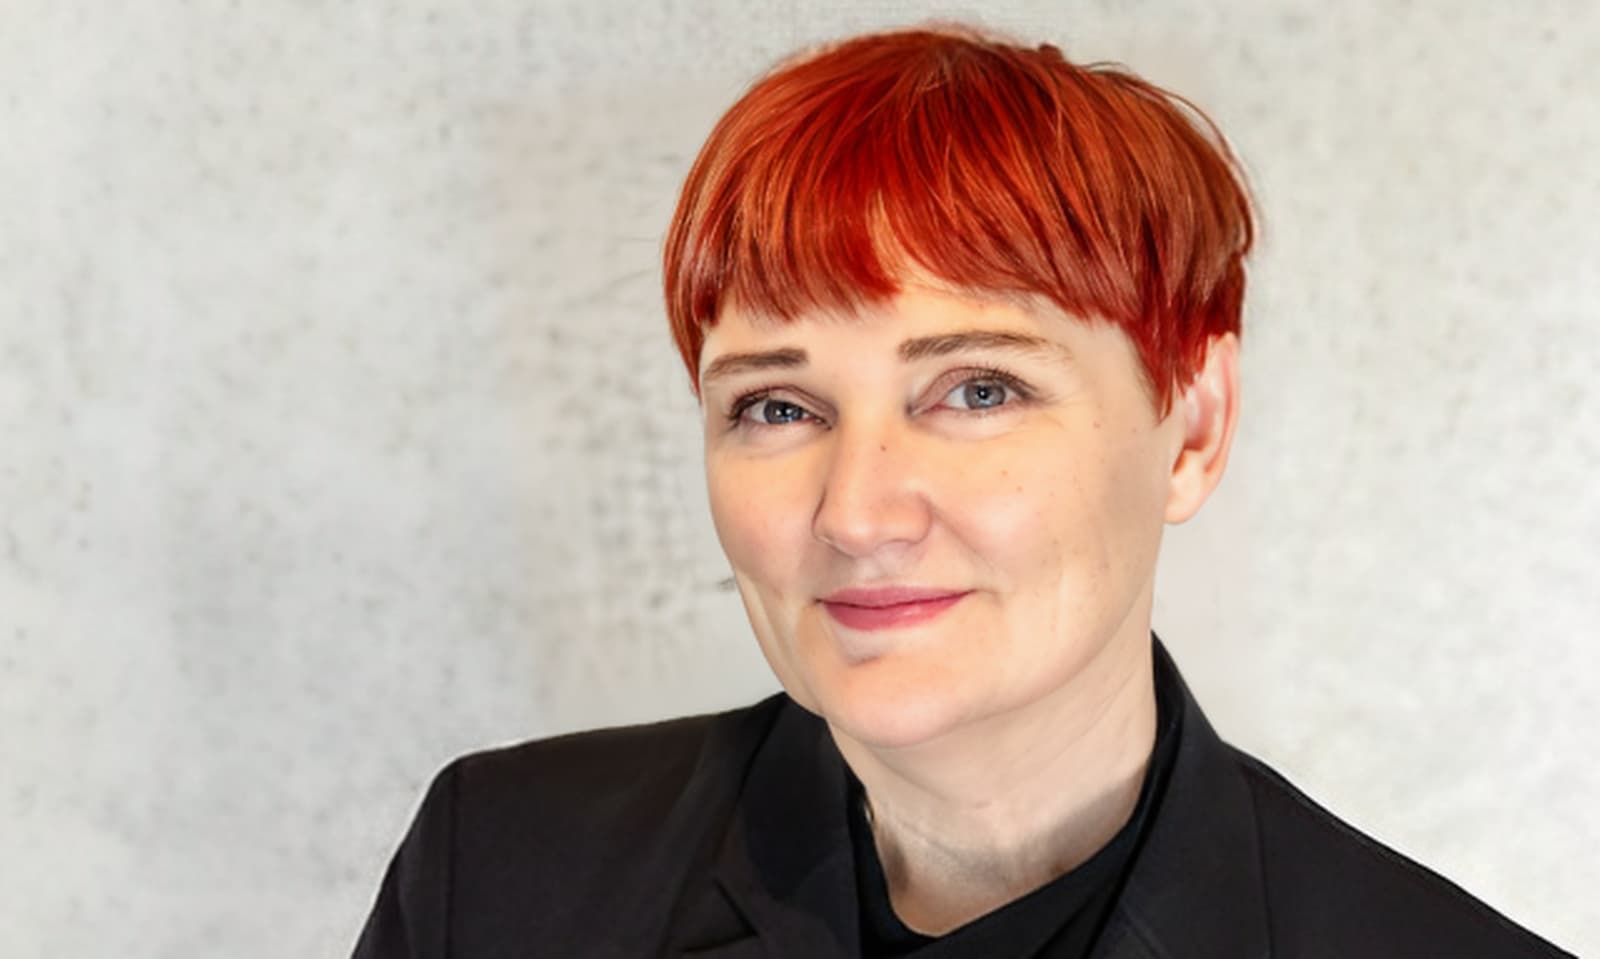 Portrait of a smiling redhead woman in an all black suit